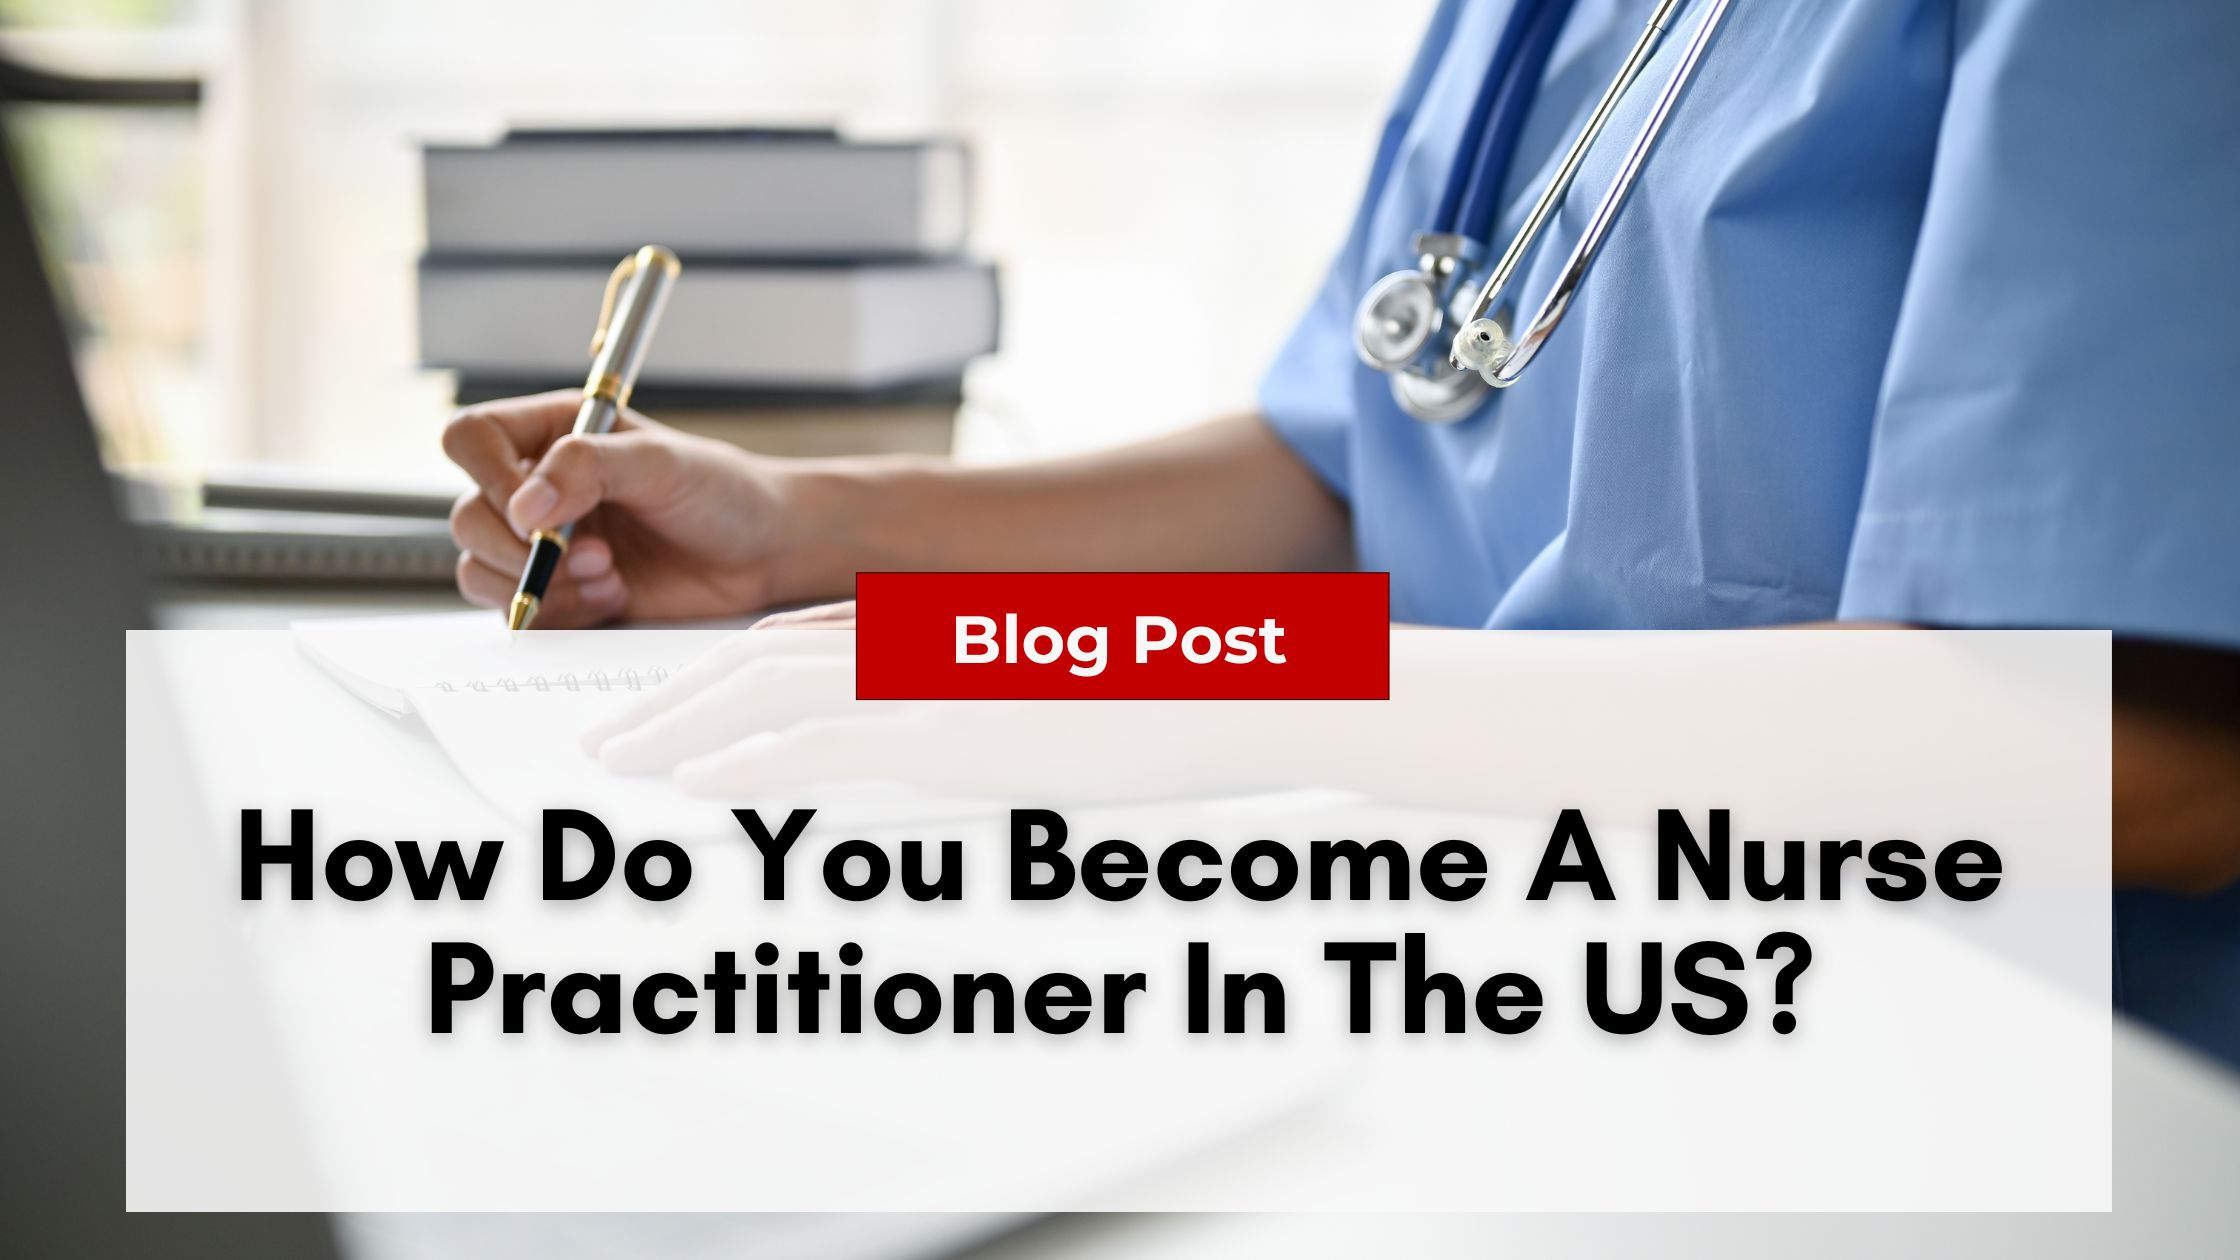 Person in scrubs writing notes, with books and a pen visible; text overlay reads "How Do You Become A Nurse Practitioner In The US?" in black on a white background, under a red "Blog Post" label. Learn about the path to this rewarding career and tips to avoid nurse practitioner burnout.